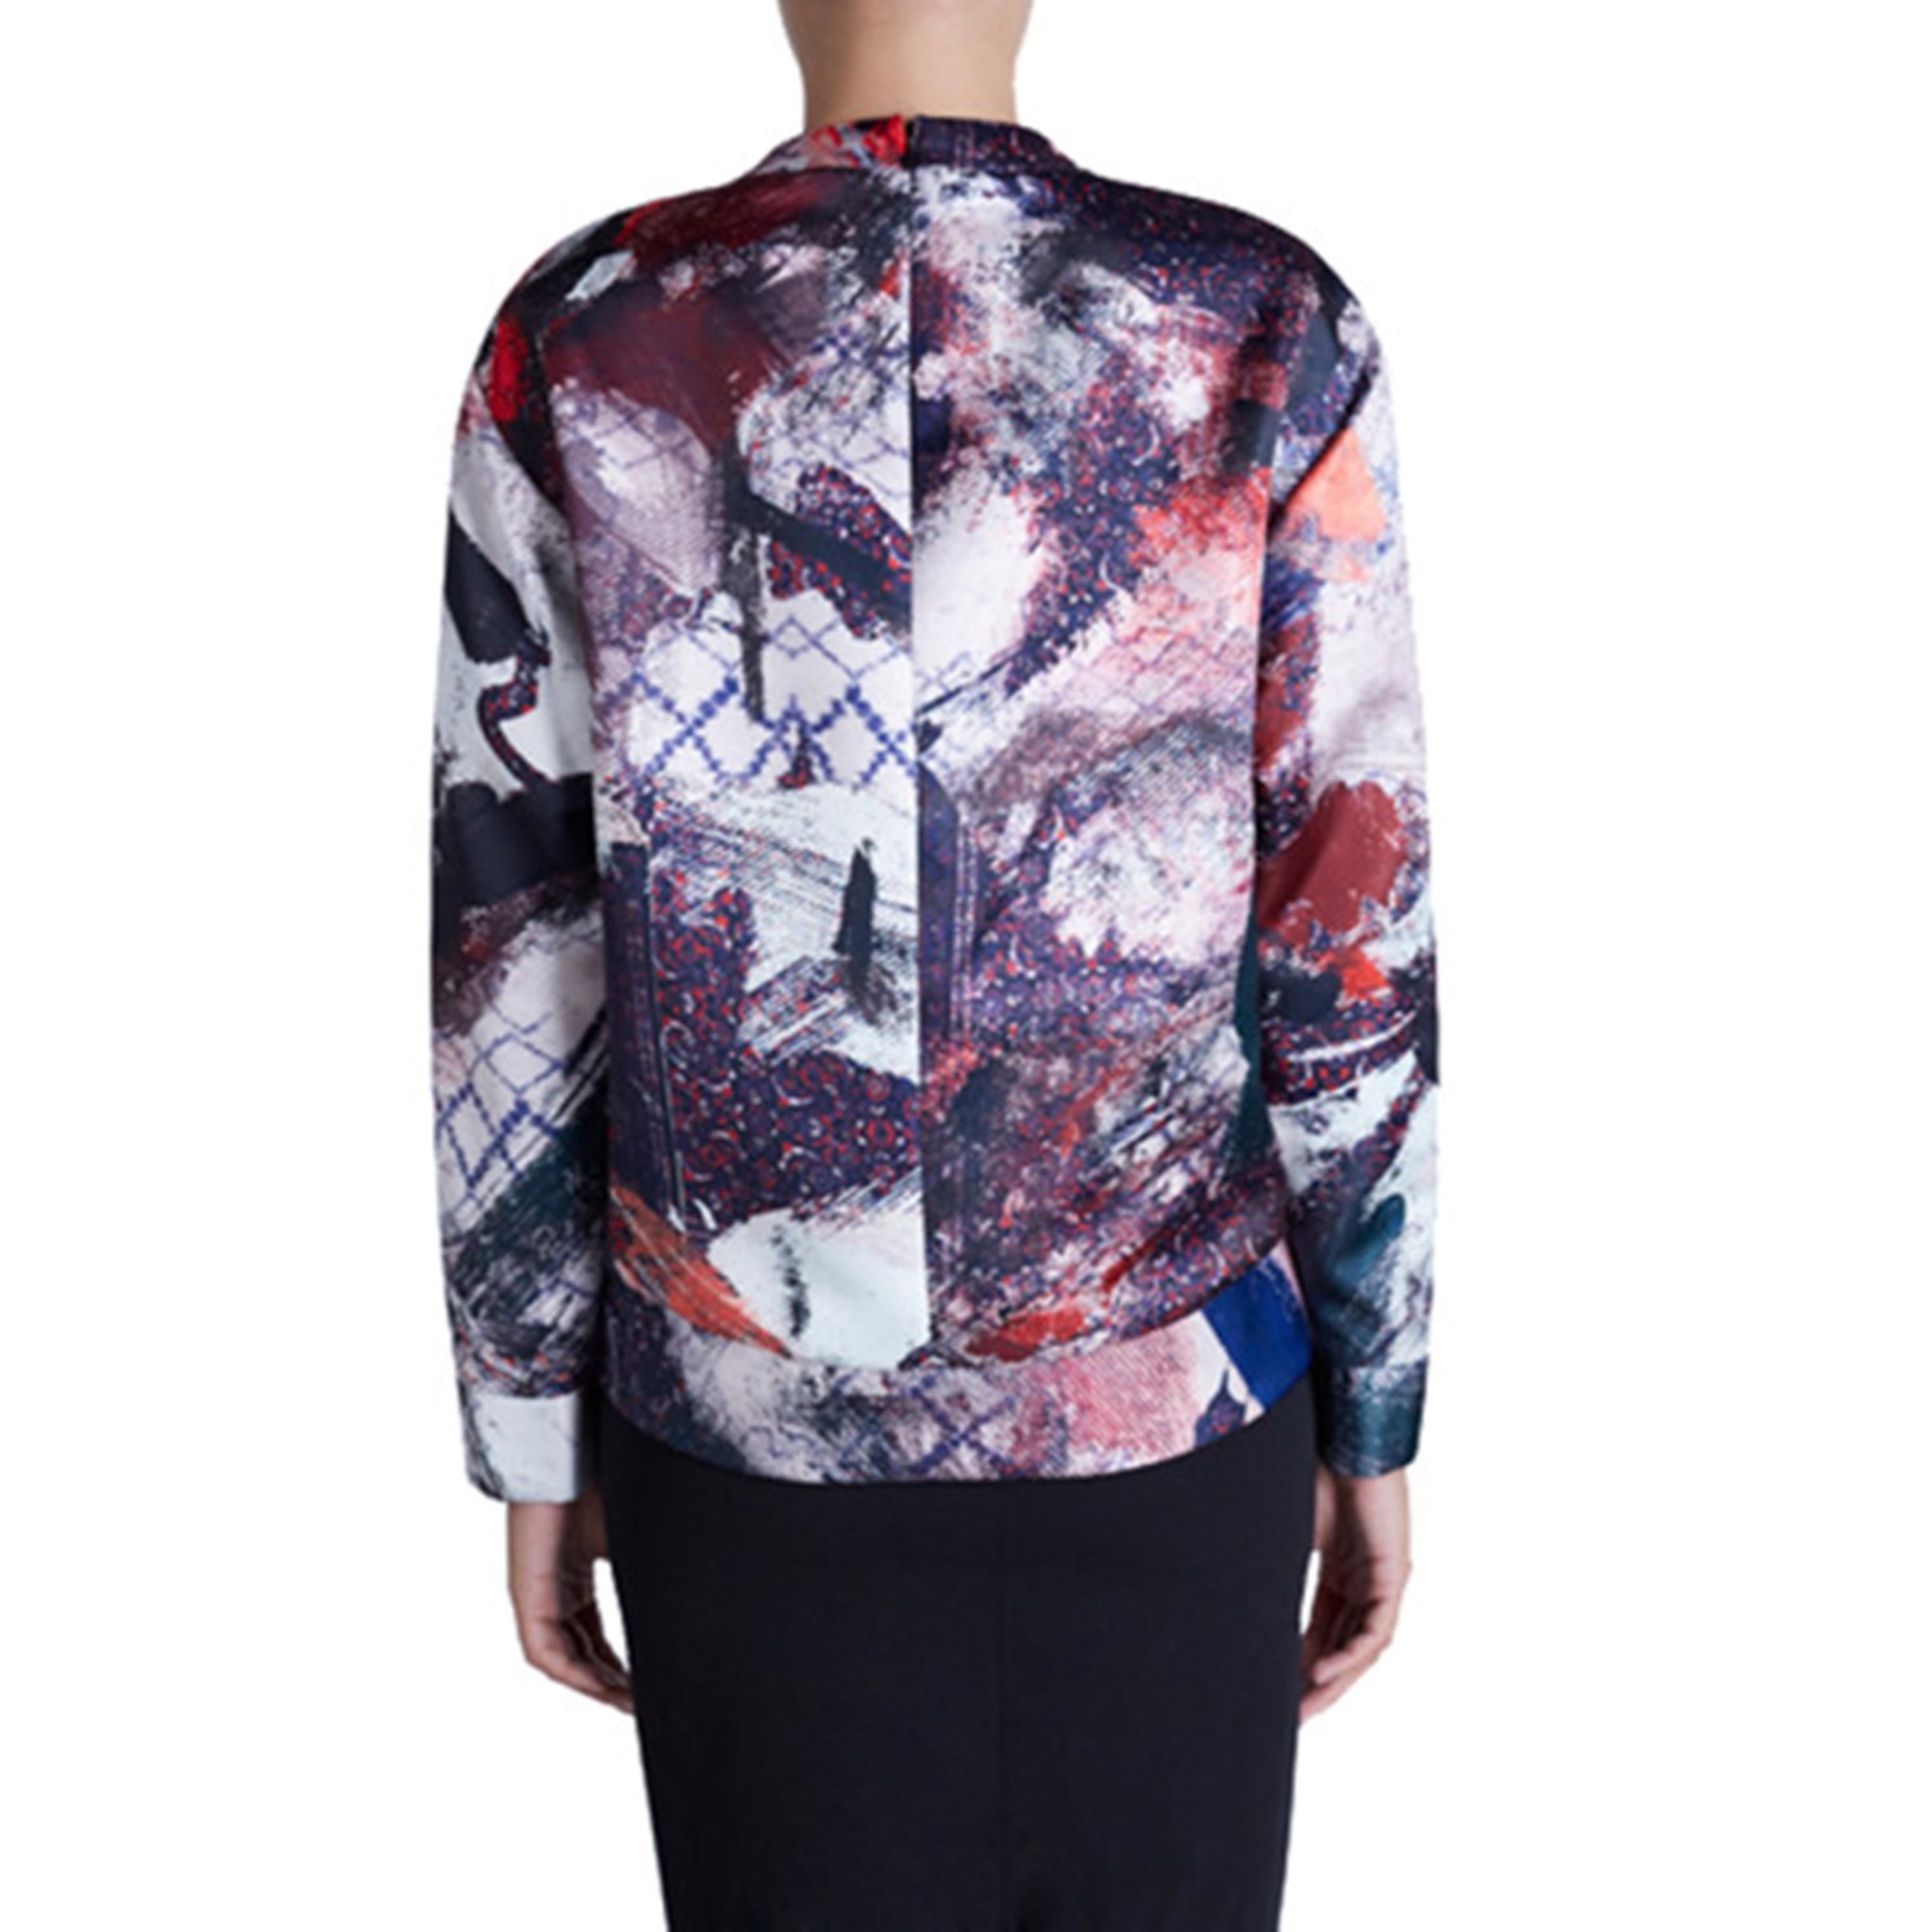 Designed with an artistic print, this Prabal Gurung sweatshirt is stylish and calm. Its satin exterior is designed with shades of purple, pink, and grey, featuring long sleeves and a round neckline. This item does not include the accessories shown